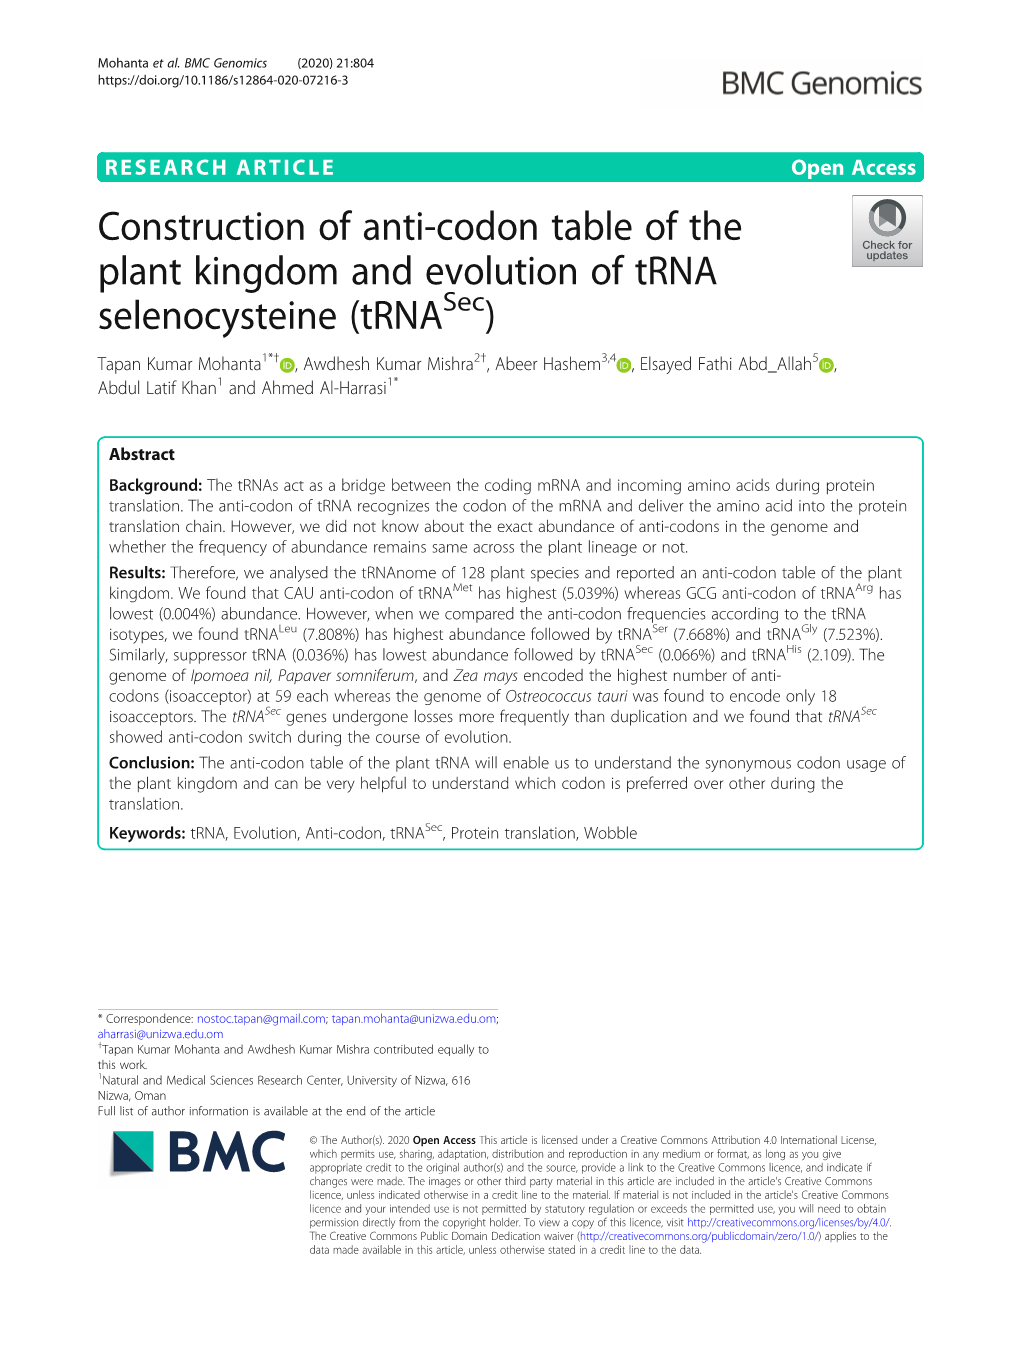 Construction of Anti-Codon Table of the Plant Kingdom and Evolution Of